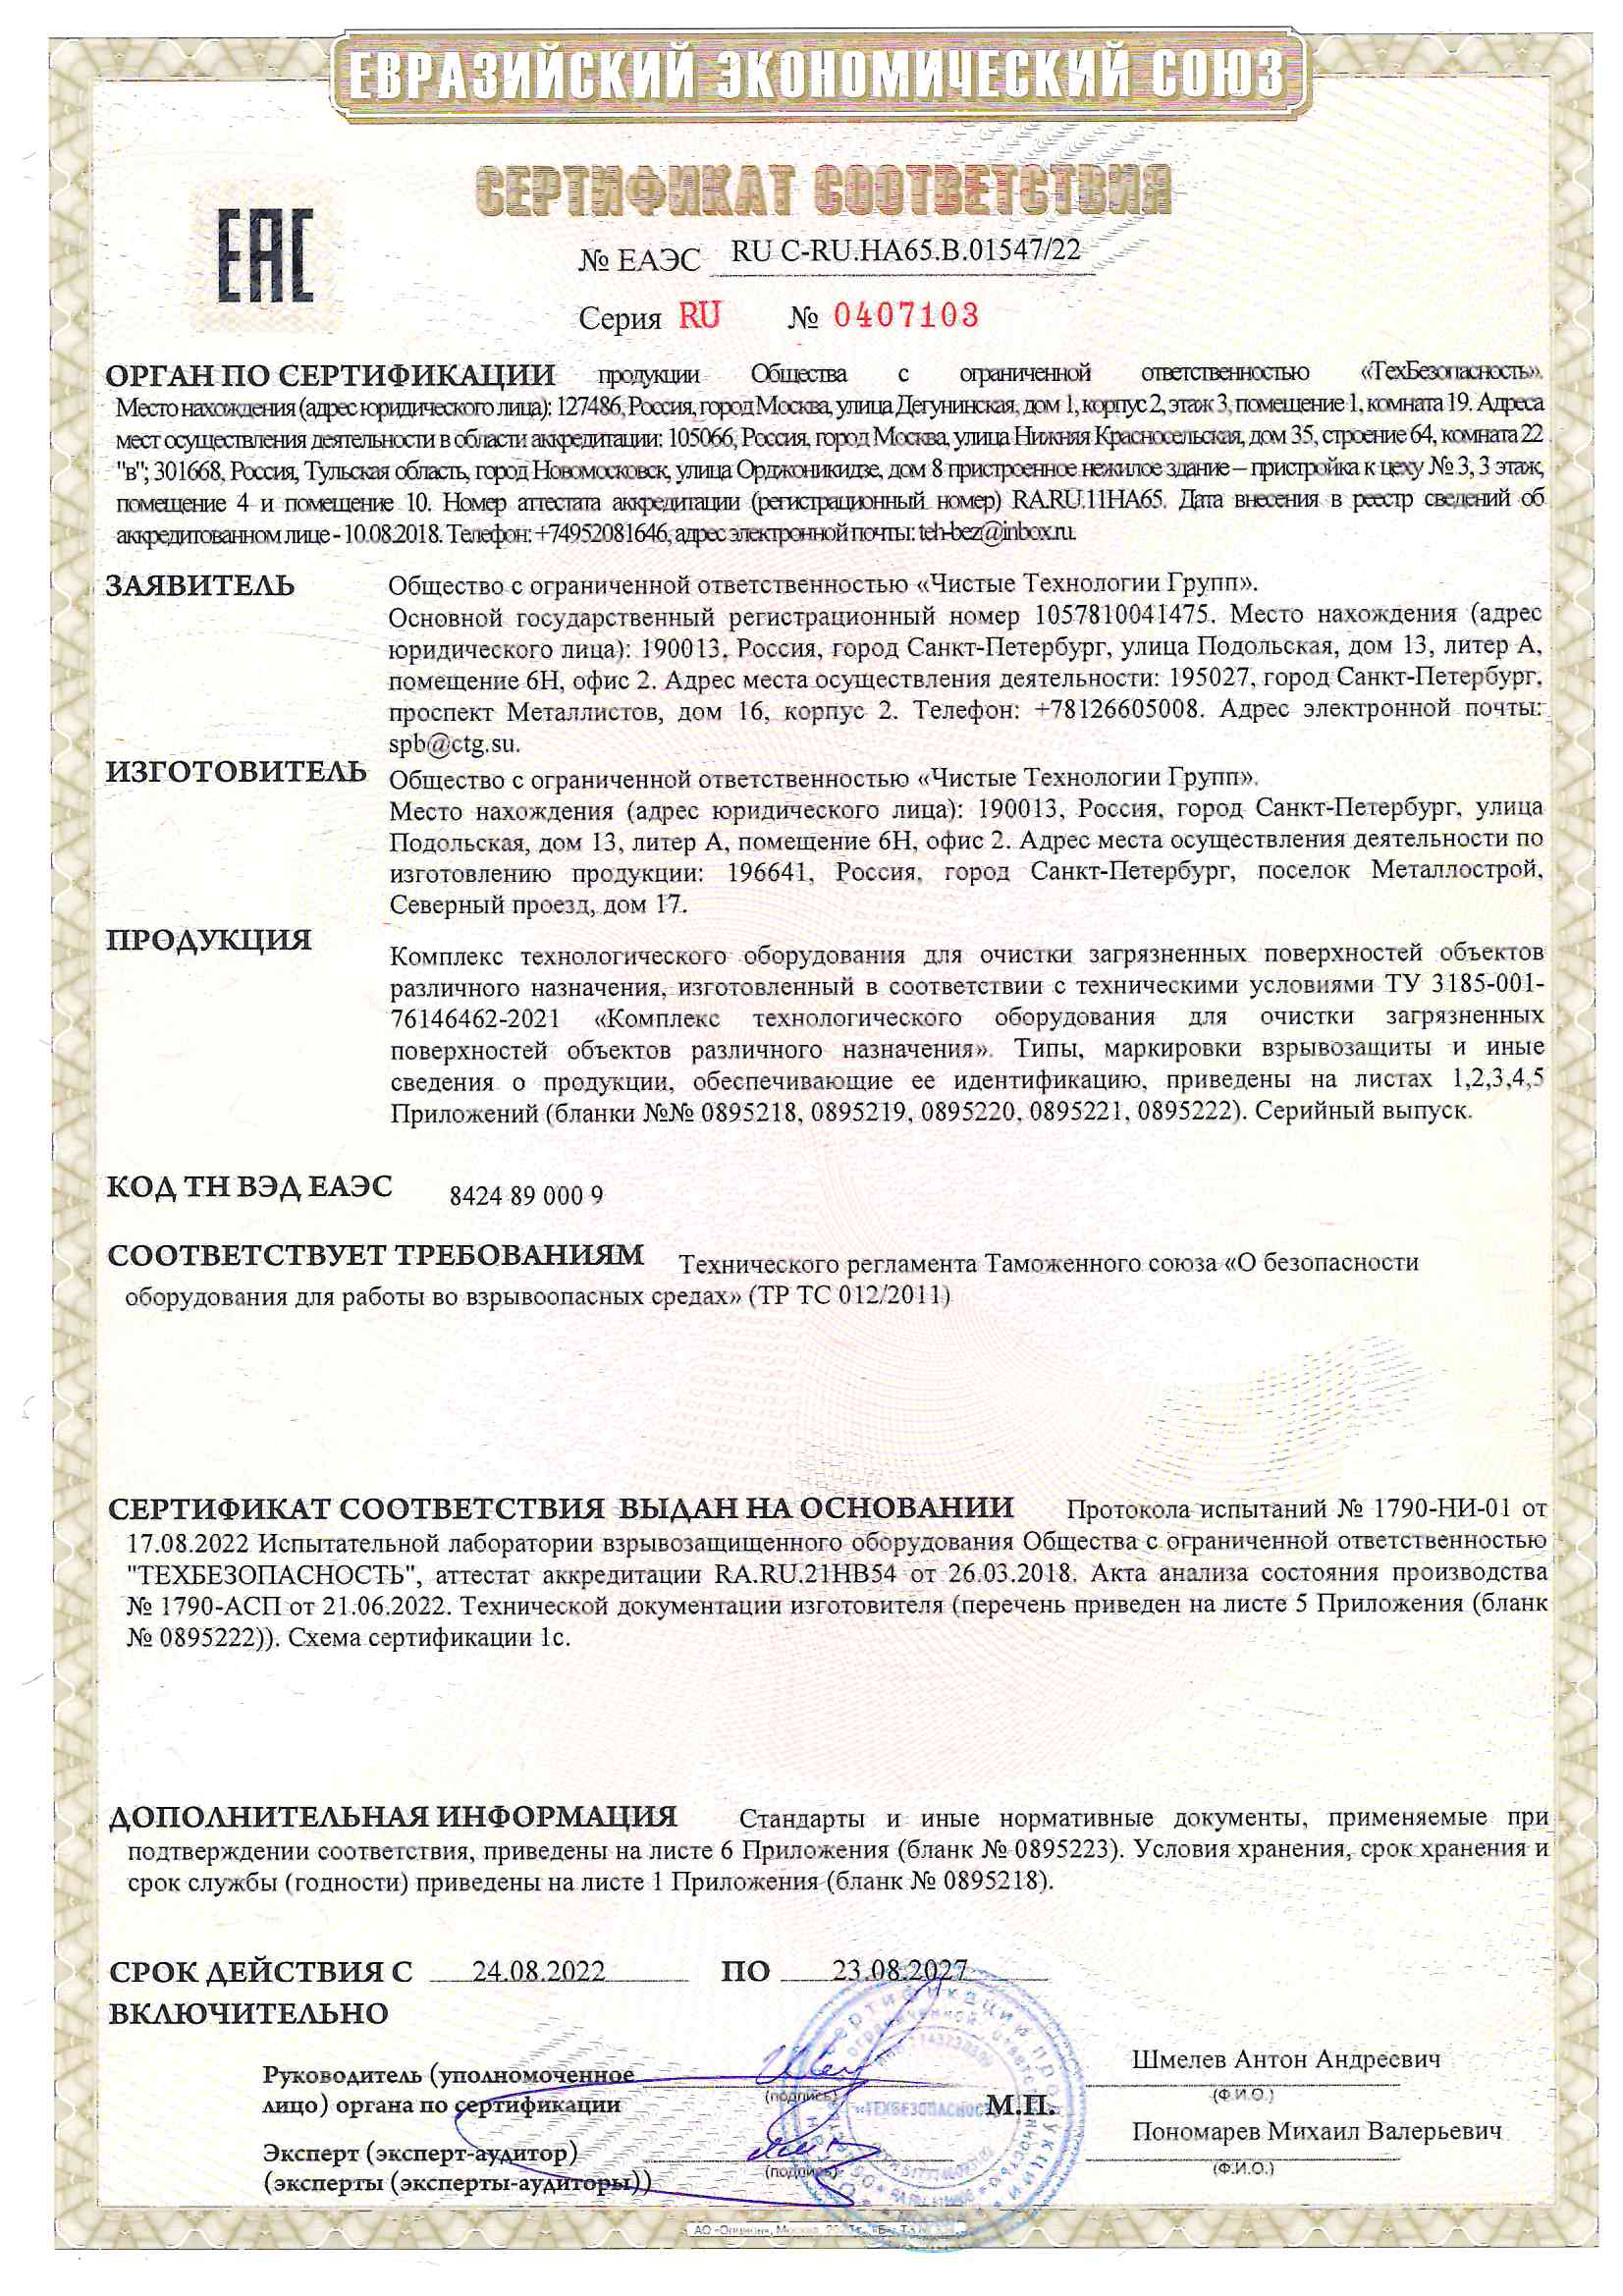 certificate of compliance with CTG standards of the Technical Regulations of the Customs Union "On the safety of equipment for work in explosive environments" (TR CU 012/2011).